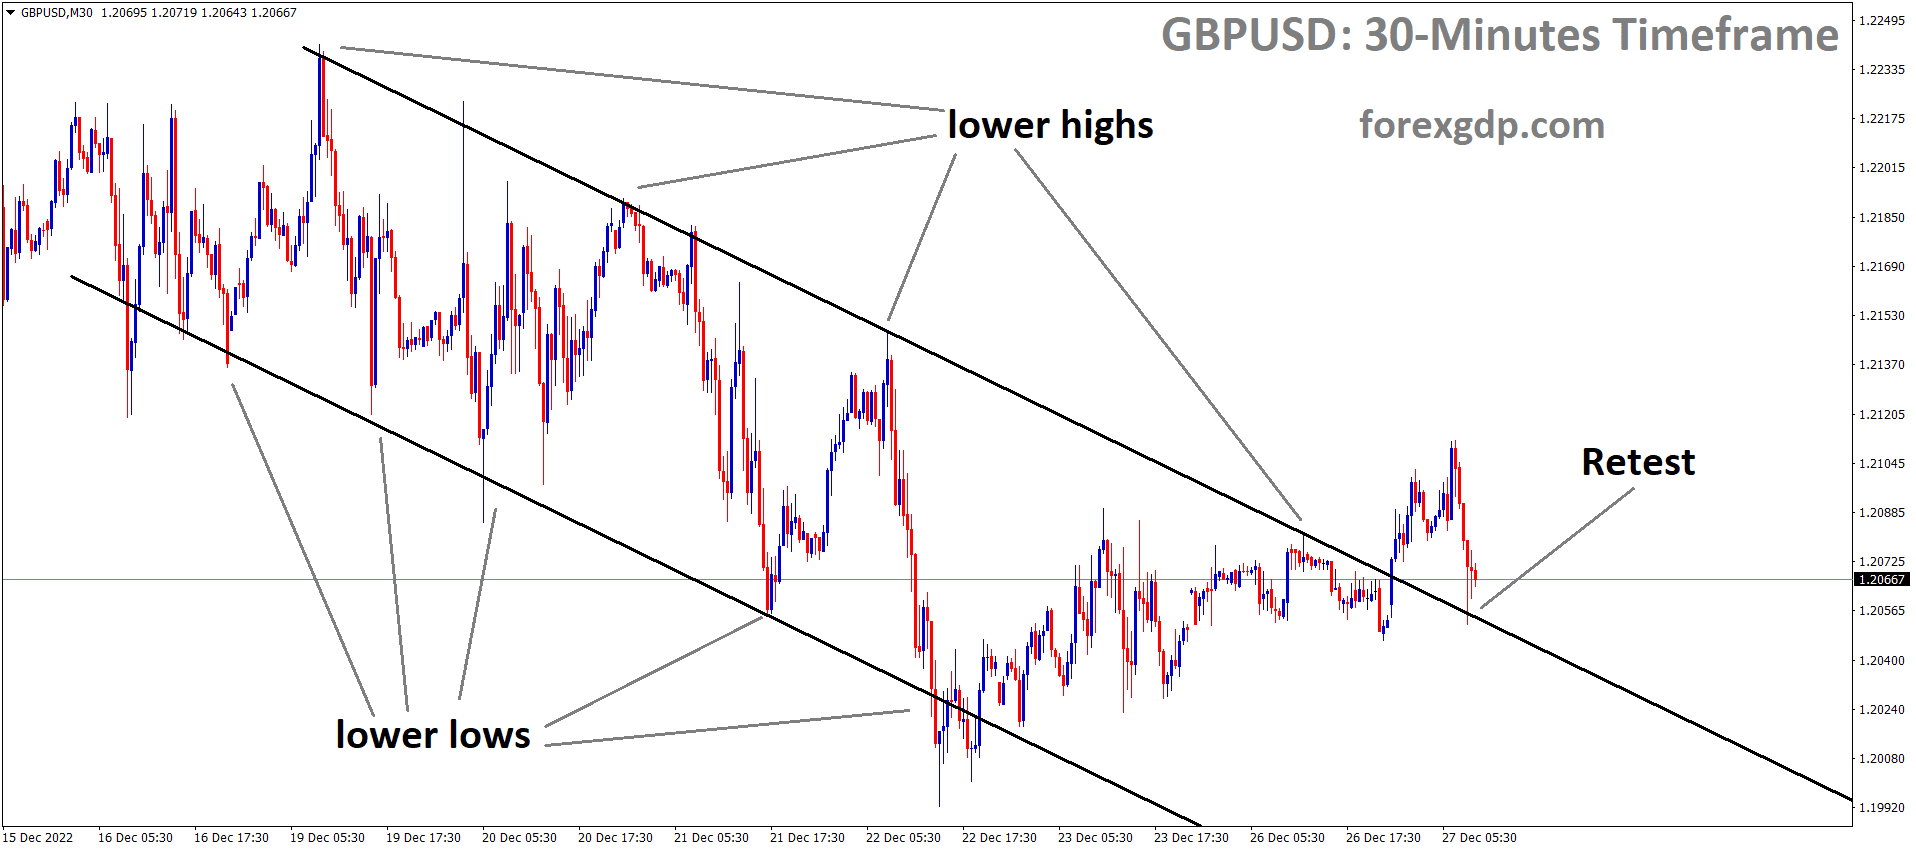 GBPUSD has broken the Descending channel and the market has retested the broken area of the channel